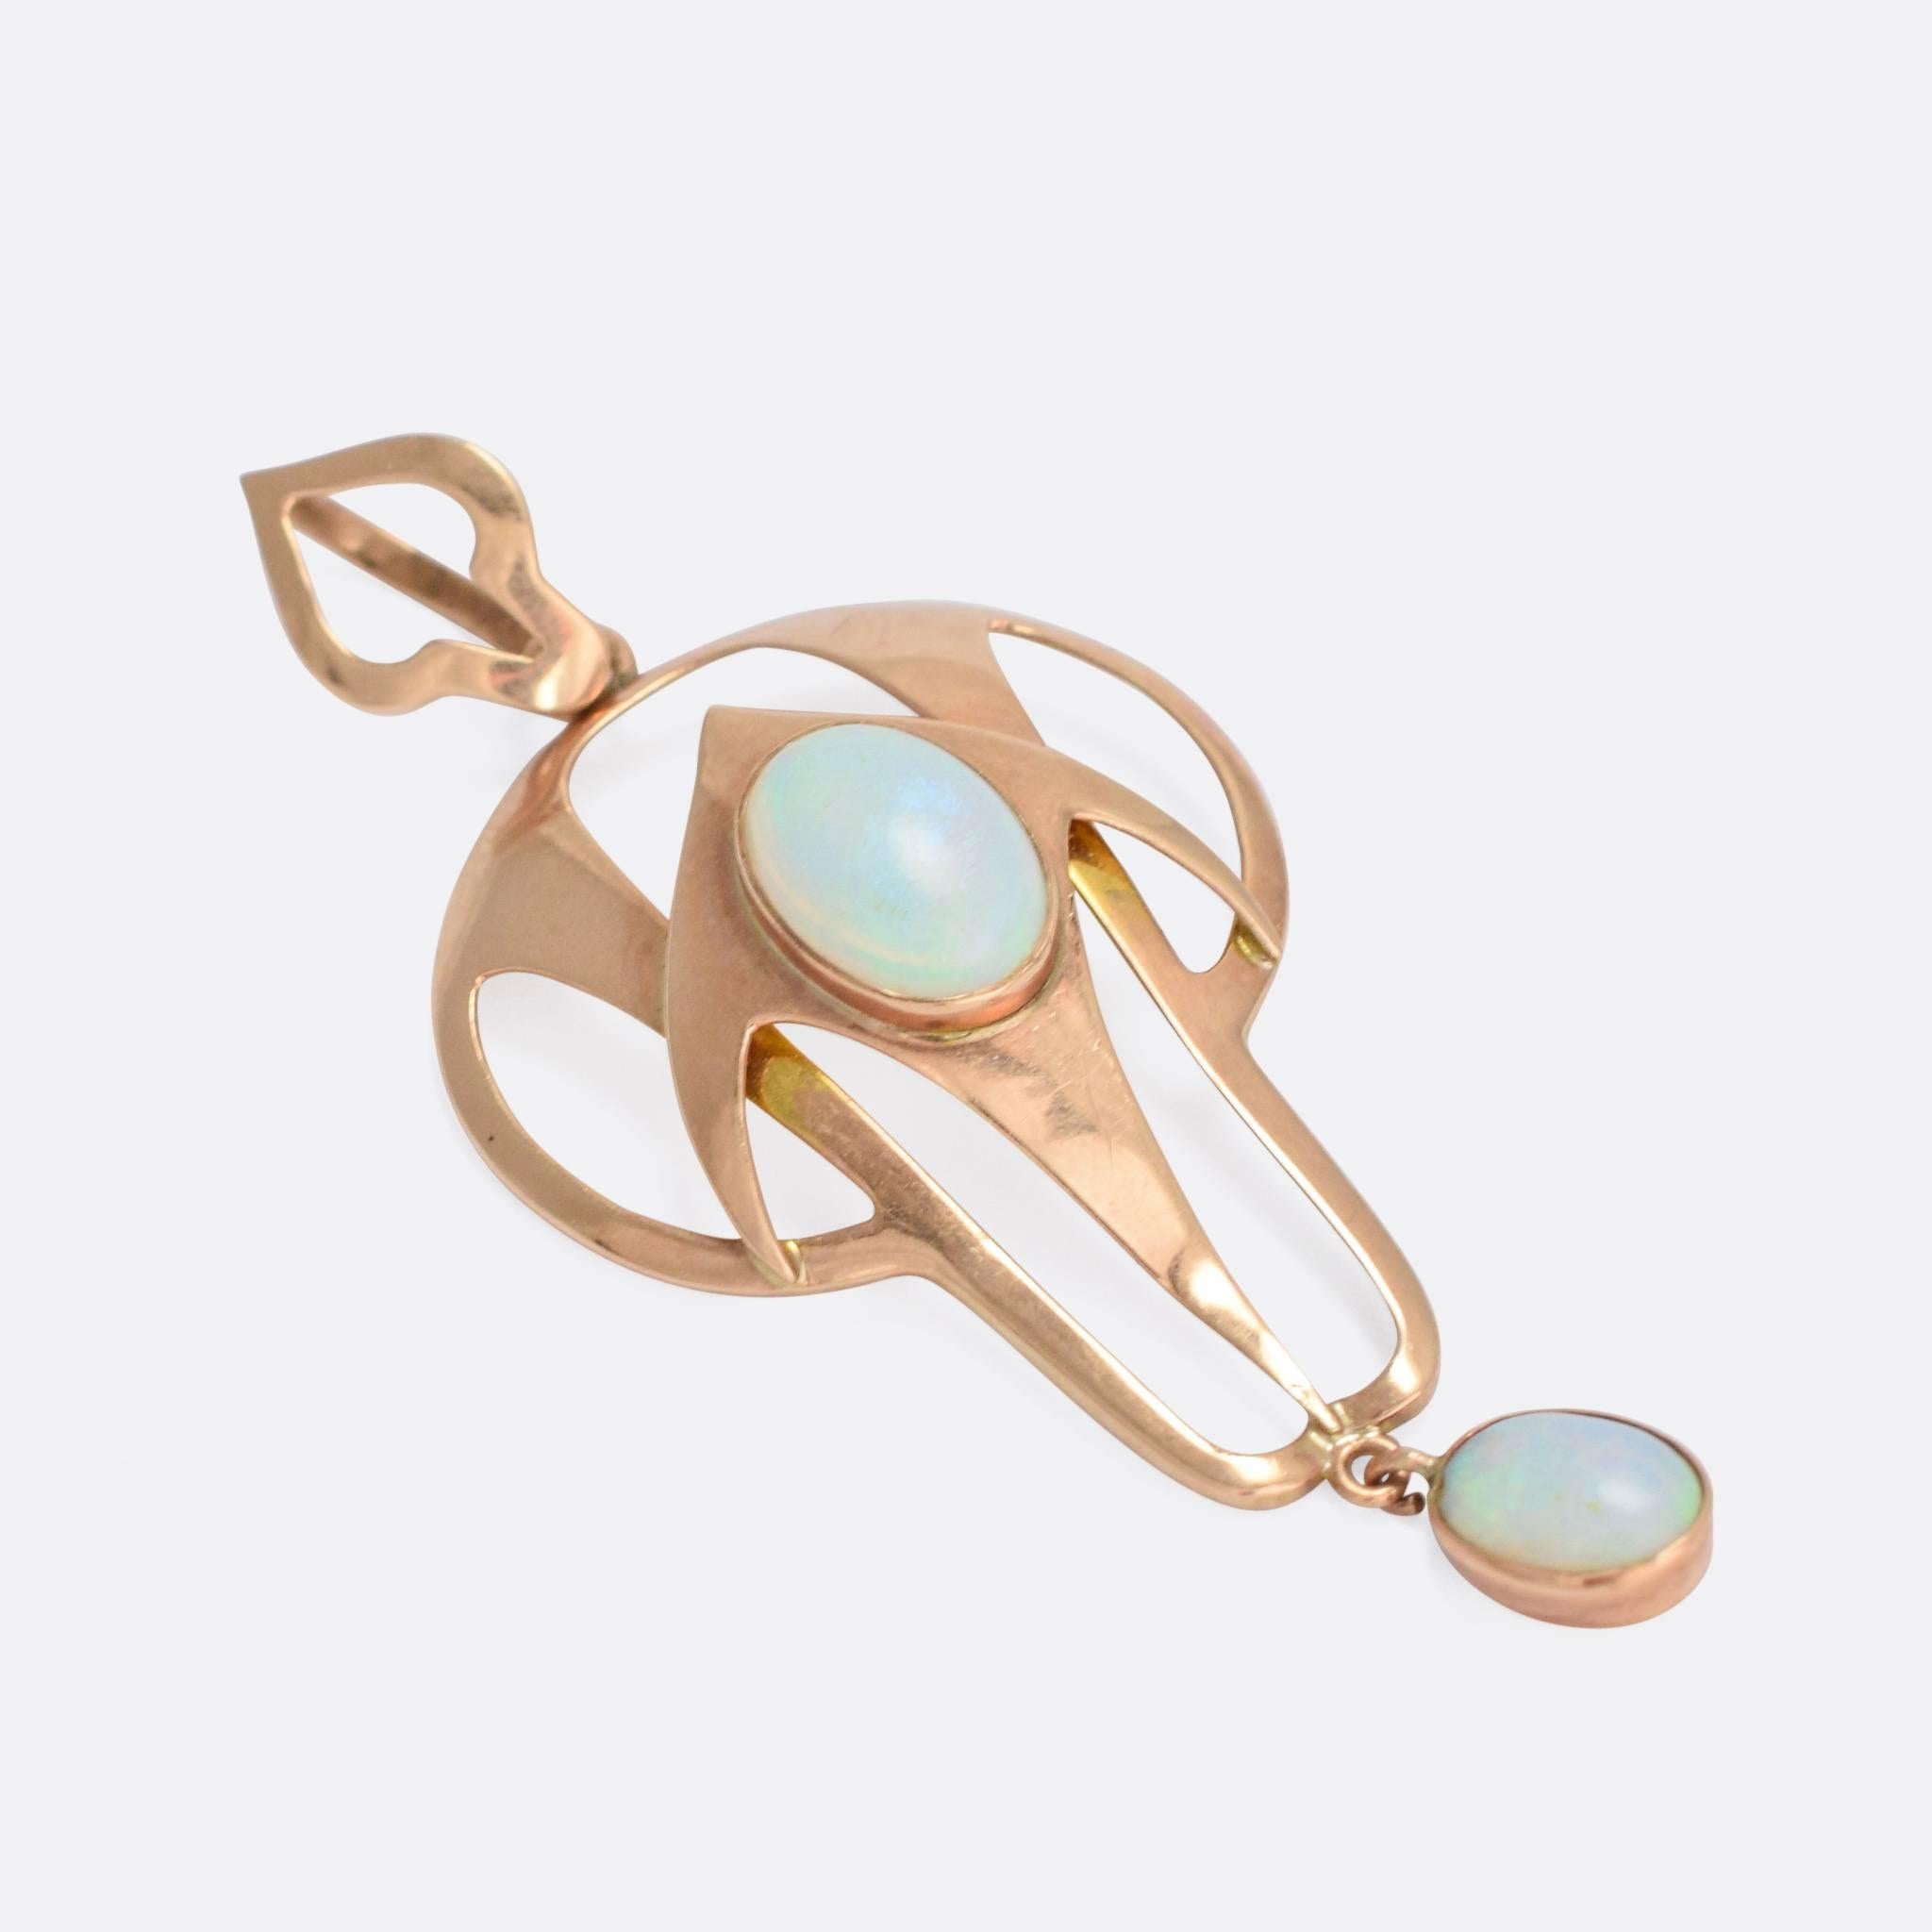 A stylish antique pendant crafted in the Art Nouveau style. Set with two vibrant, colourful opals, the piece is modelled in 9k rose gold - complete with the original articulated bail. The graceful curves and lines are very typical of the style, and